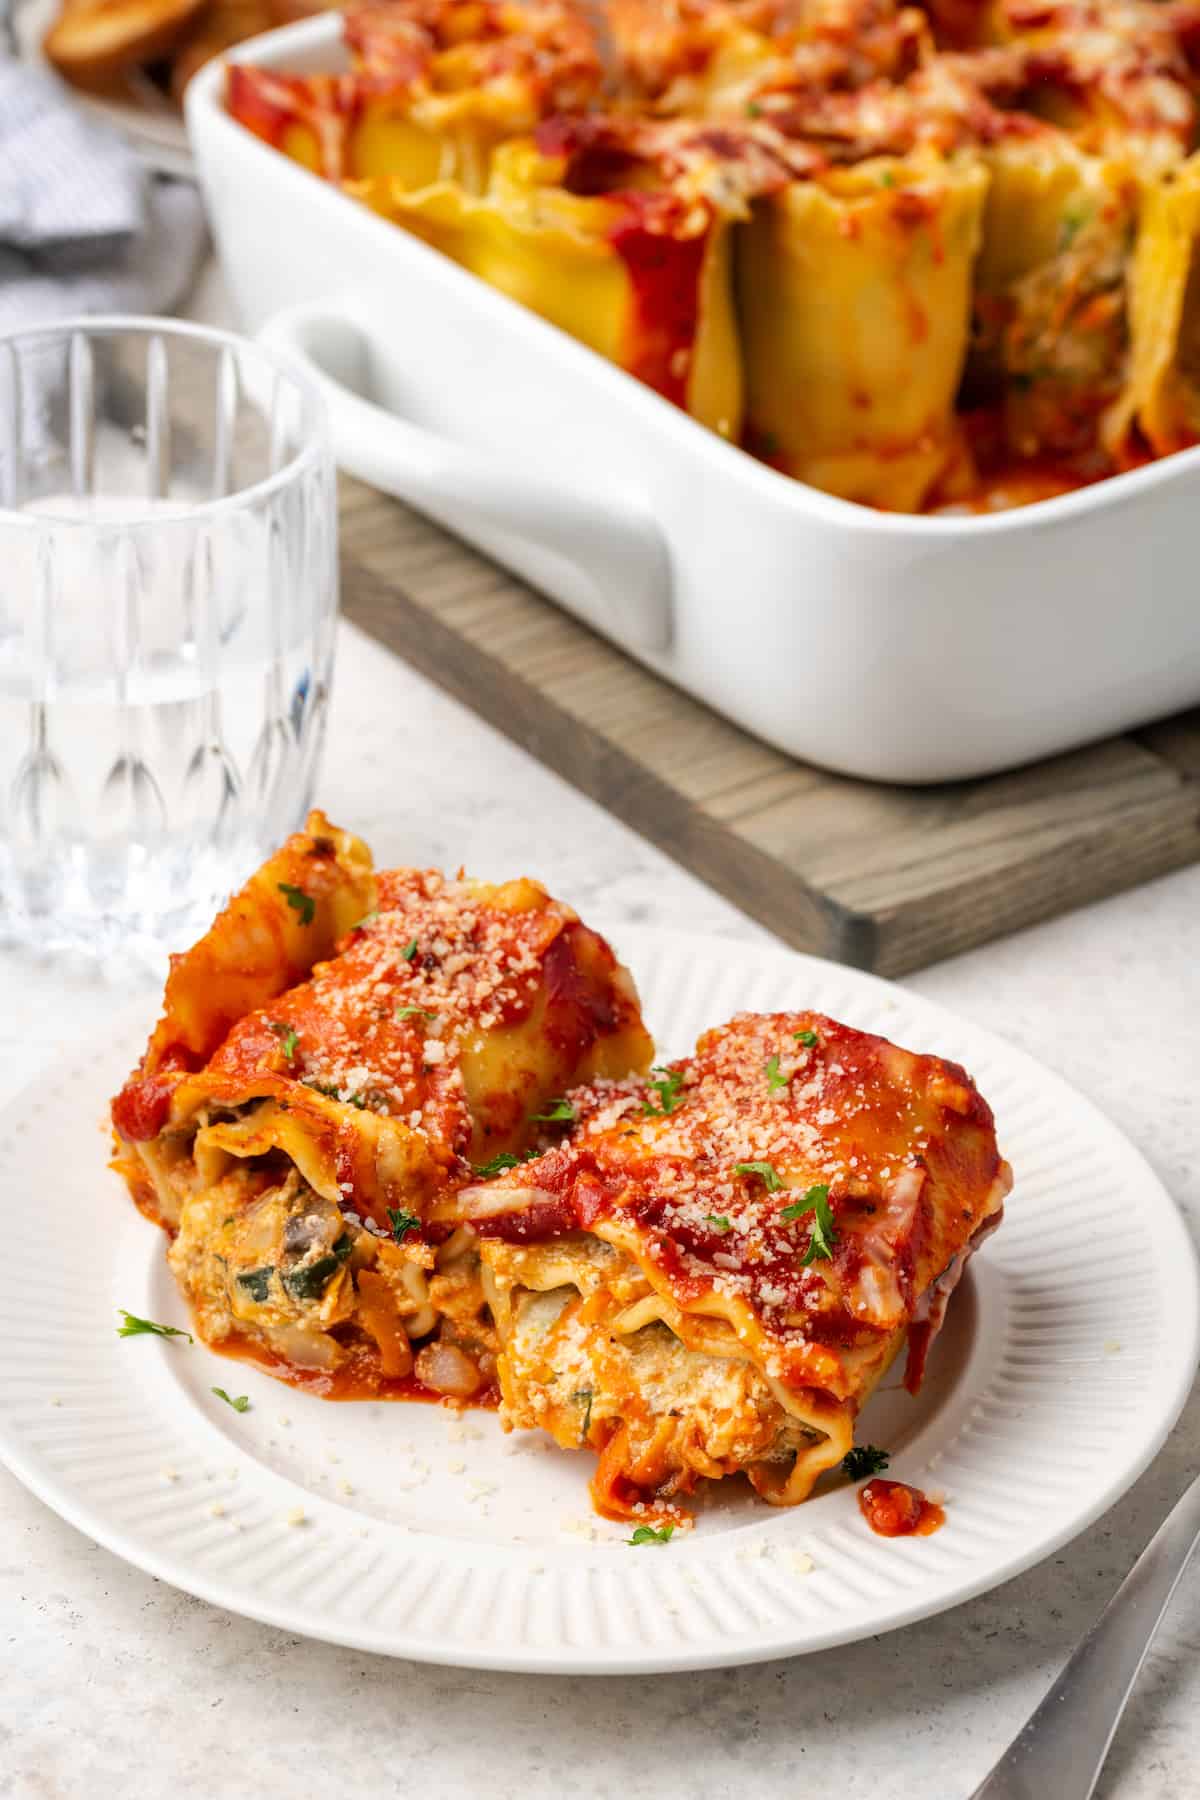 Two veggie lasagna roll ups served on a small white plate with the remaining casserole dish in the background.